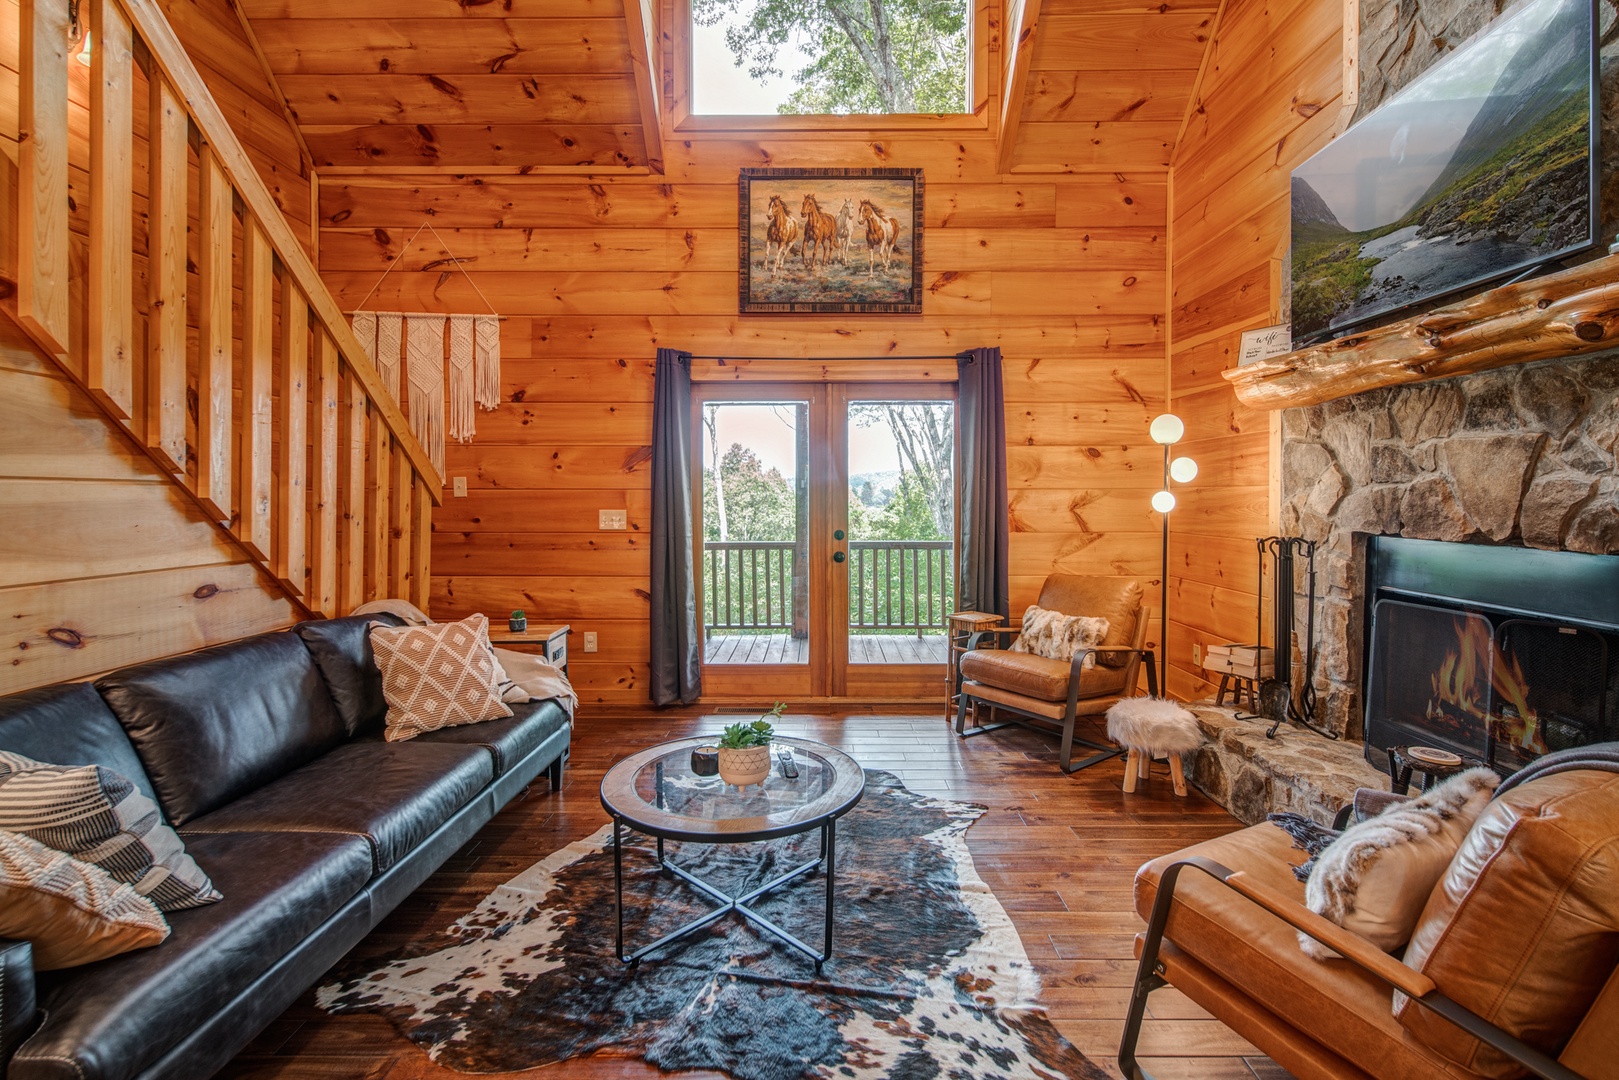 Head out through the French doors & enjoy breathtaking views from the deck